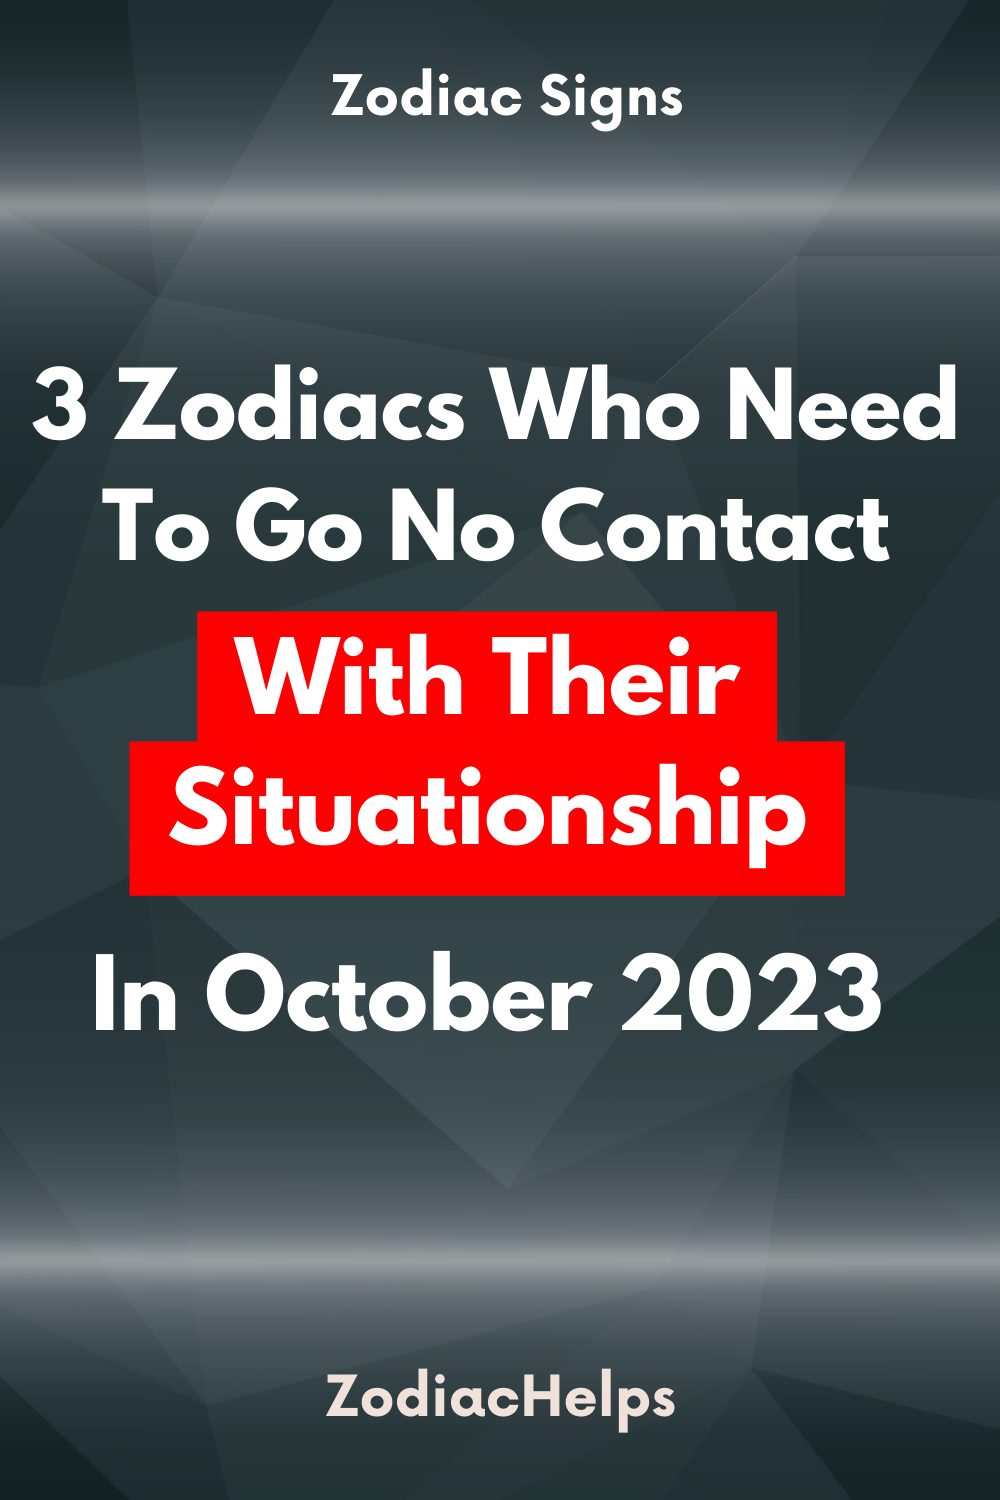 3 Zodiacs Who Need To Go No Contact With Their Situationship In October 2023